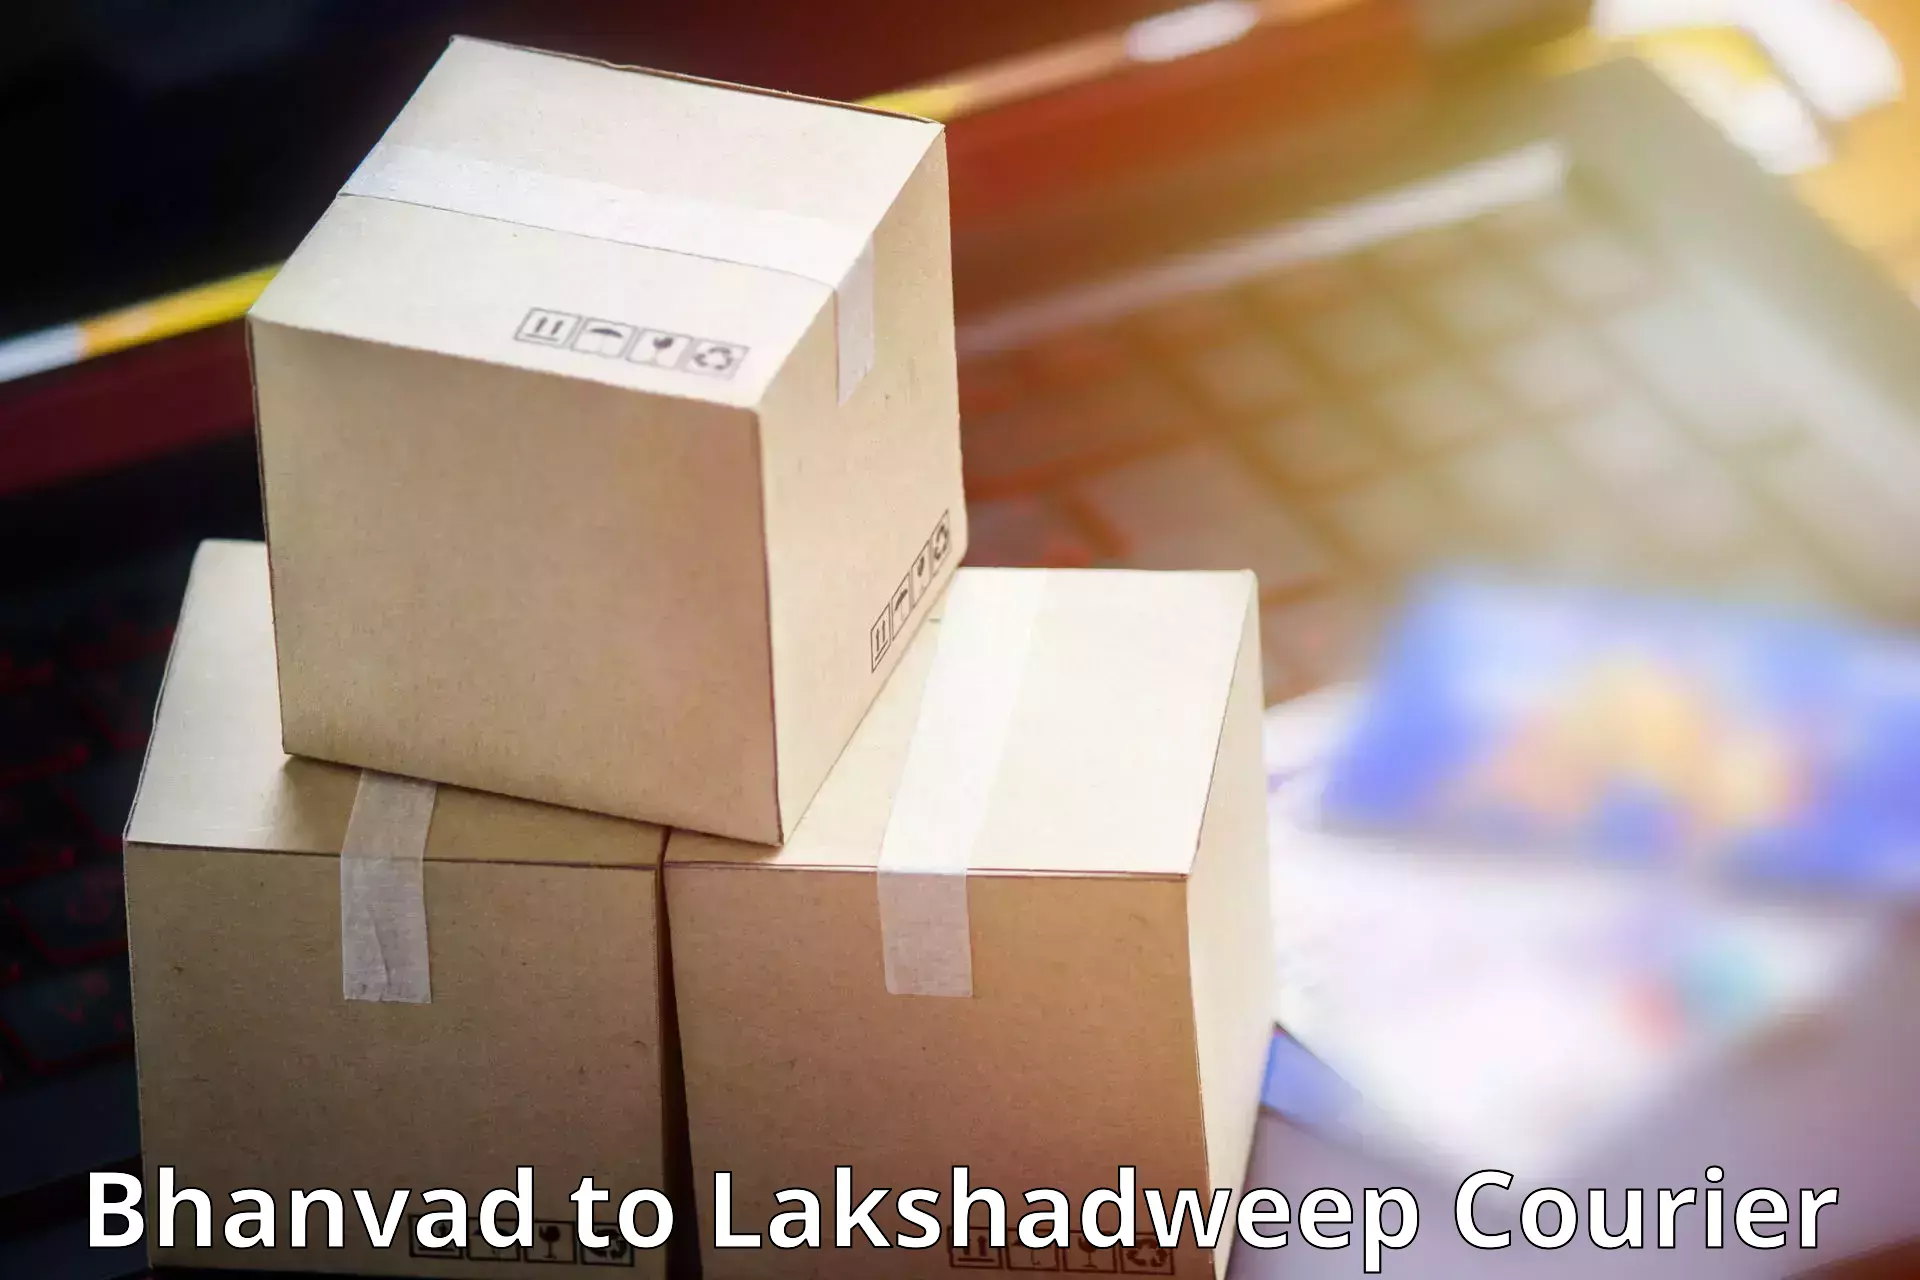 Courier service comparison Bhanvad to Lakshadweep